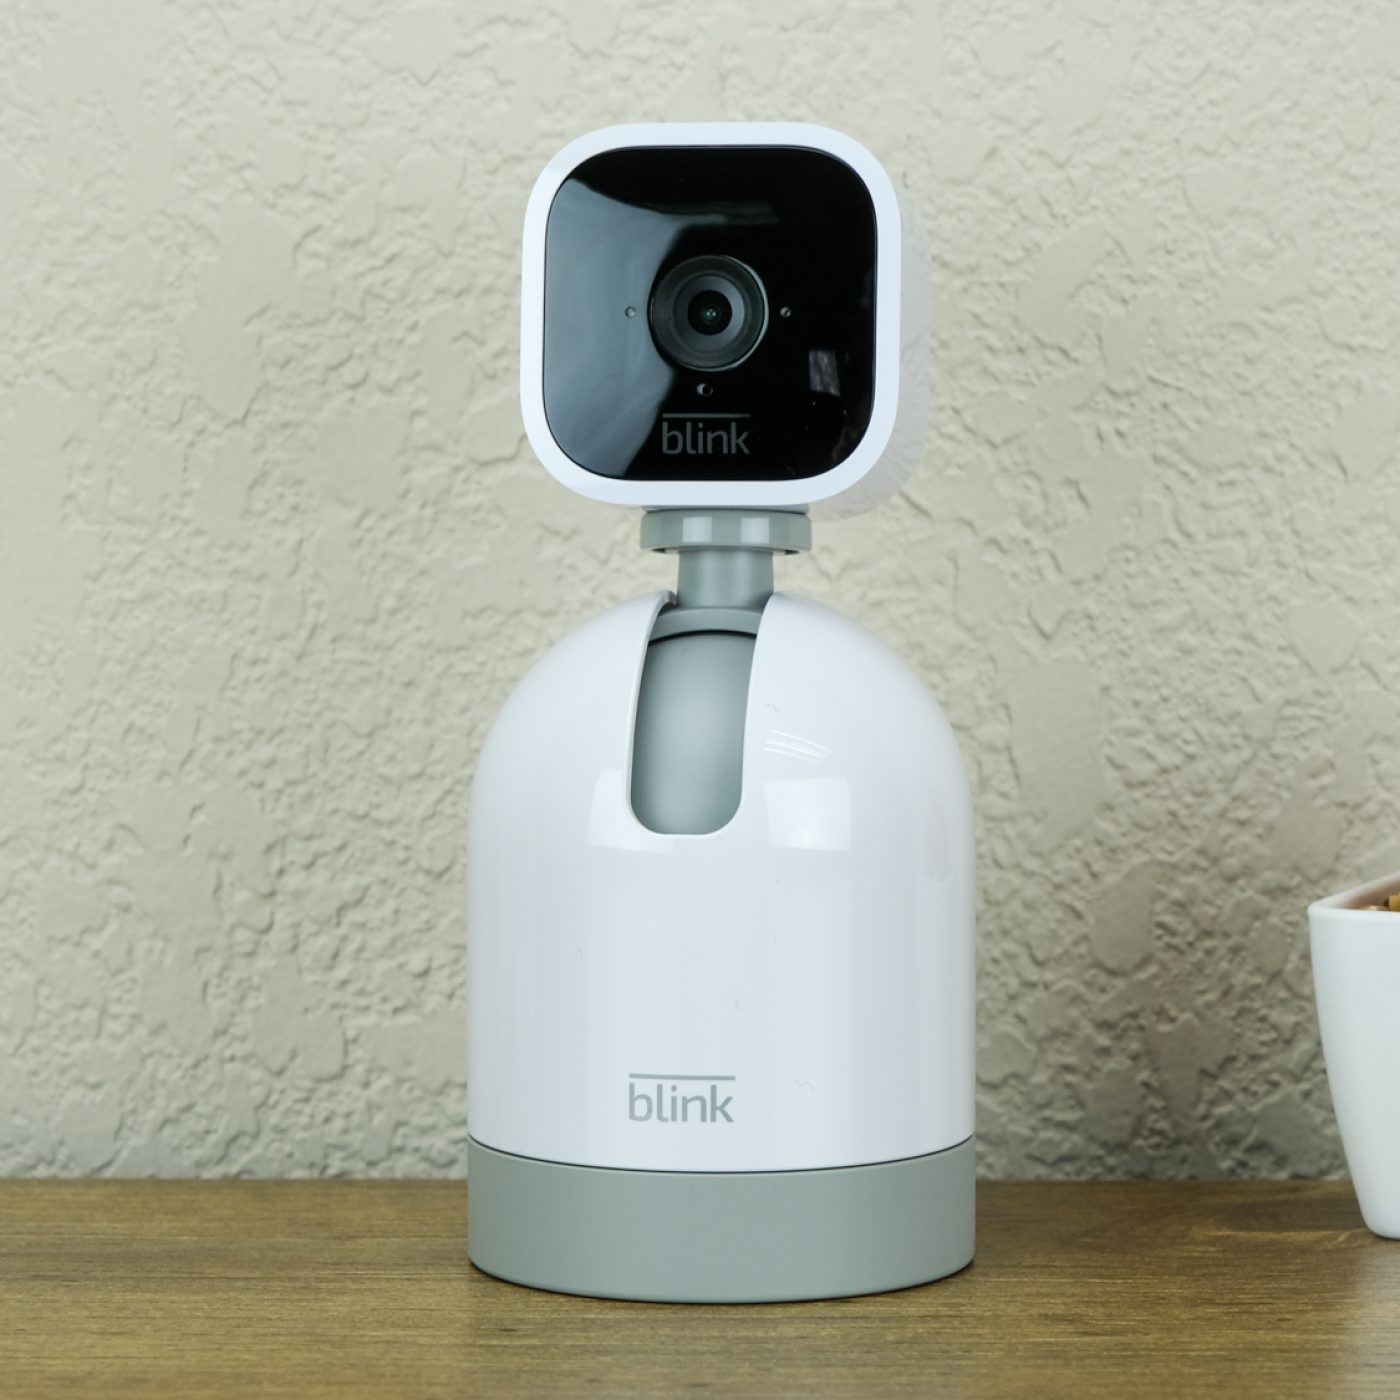 This Pair of Blink Outdoor Security Cameras Is $100 Off for a